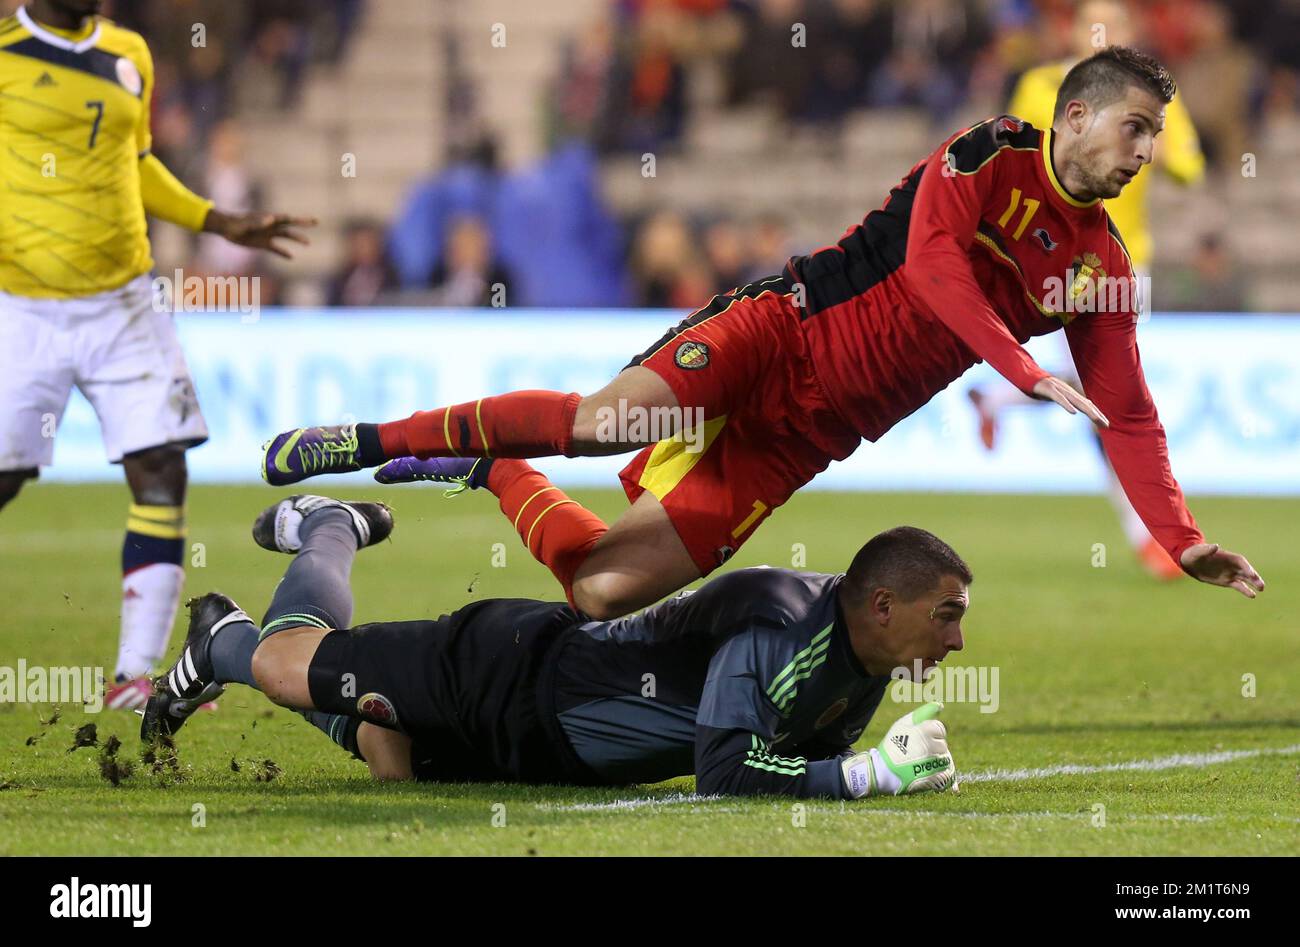 Colombia's goalkeeper Faryd Mondragon and Belgium's Kevin Mirallas fight for the ball during a friendly soccer game between the Belgian national soccer team Red Devils and Colombia, at the Koning Boudewijn Stadion - Stade Roi Baudouin in Brussels, on Thursday 14 November 2013. BELGA PHOTO VIRGINIE LEFOUR Stock Photo